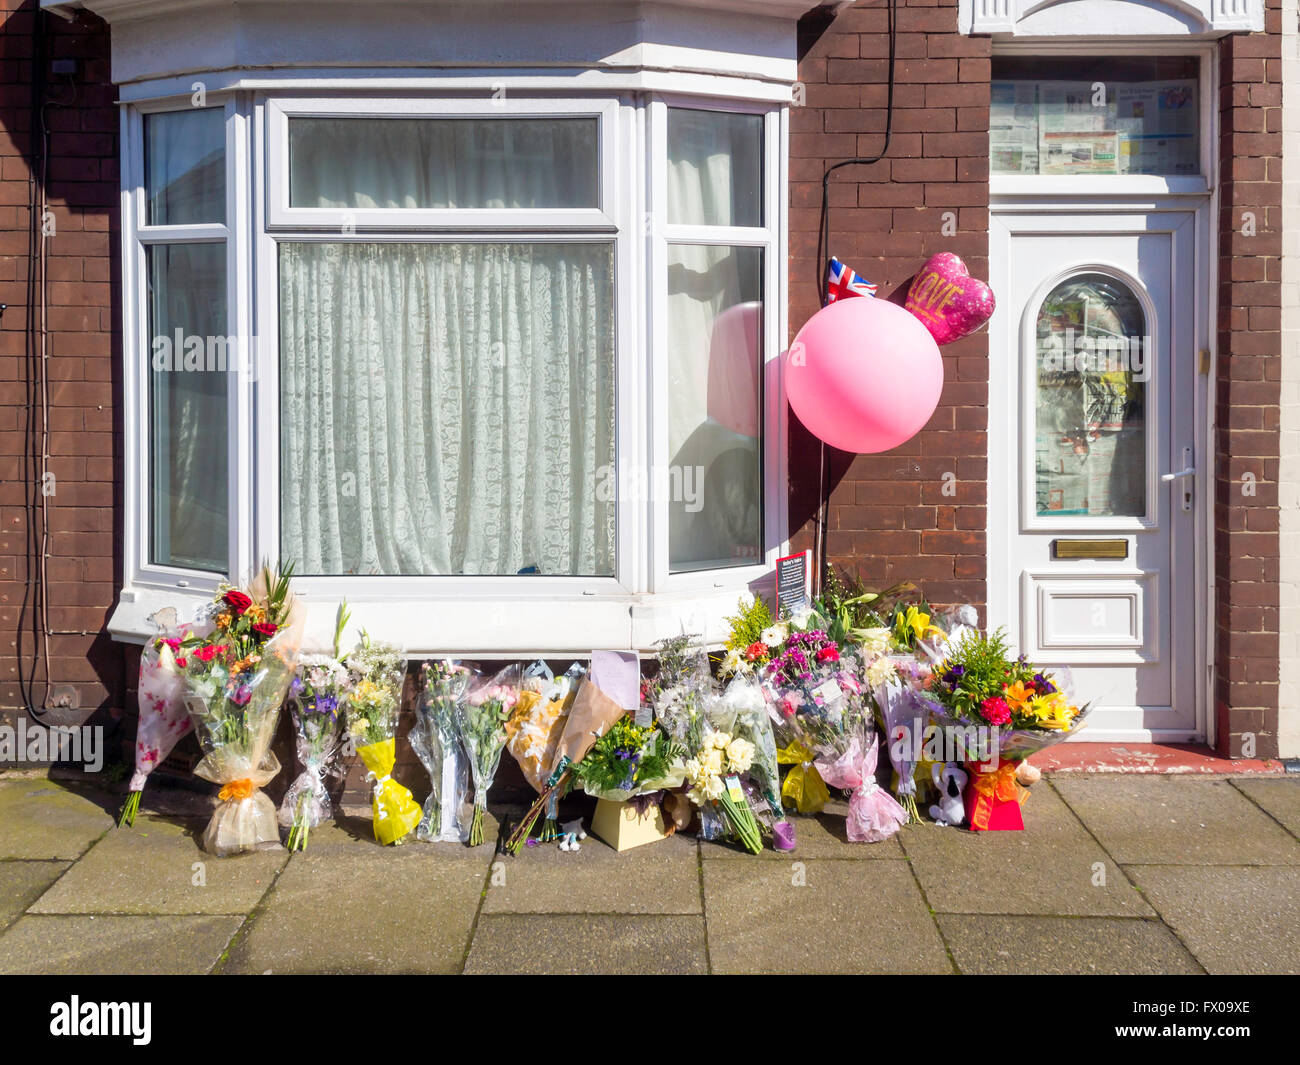 Redcar Cleveland UK April 9th 2016 continued strong local feeling about the case of the abused Bulldog called “Baby” has led to floral tributes being placed outside its former home.      Andrew Frankish, 22, and his brother Daniel, 19, from Redcar, were given 21-week jail sentences suspended for two years after abusing and seriously injuring a bulldog named Baby, which was later put down.  World-wide interest in the case has produced several petitions to demand stiffer sentences for animal cruelty. Credit:  Peter Jordan NE/Alamy Live News Stock Photo